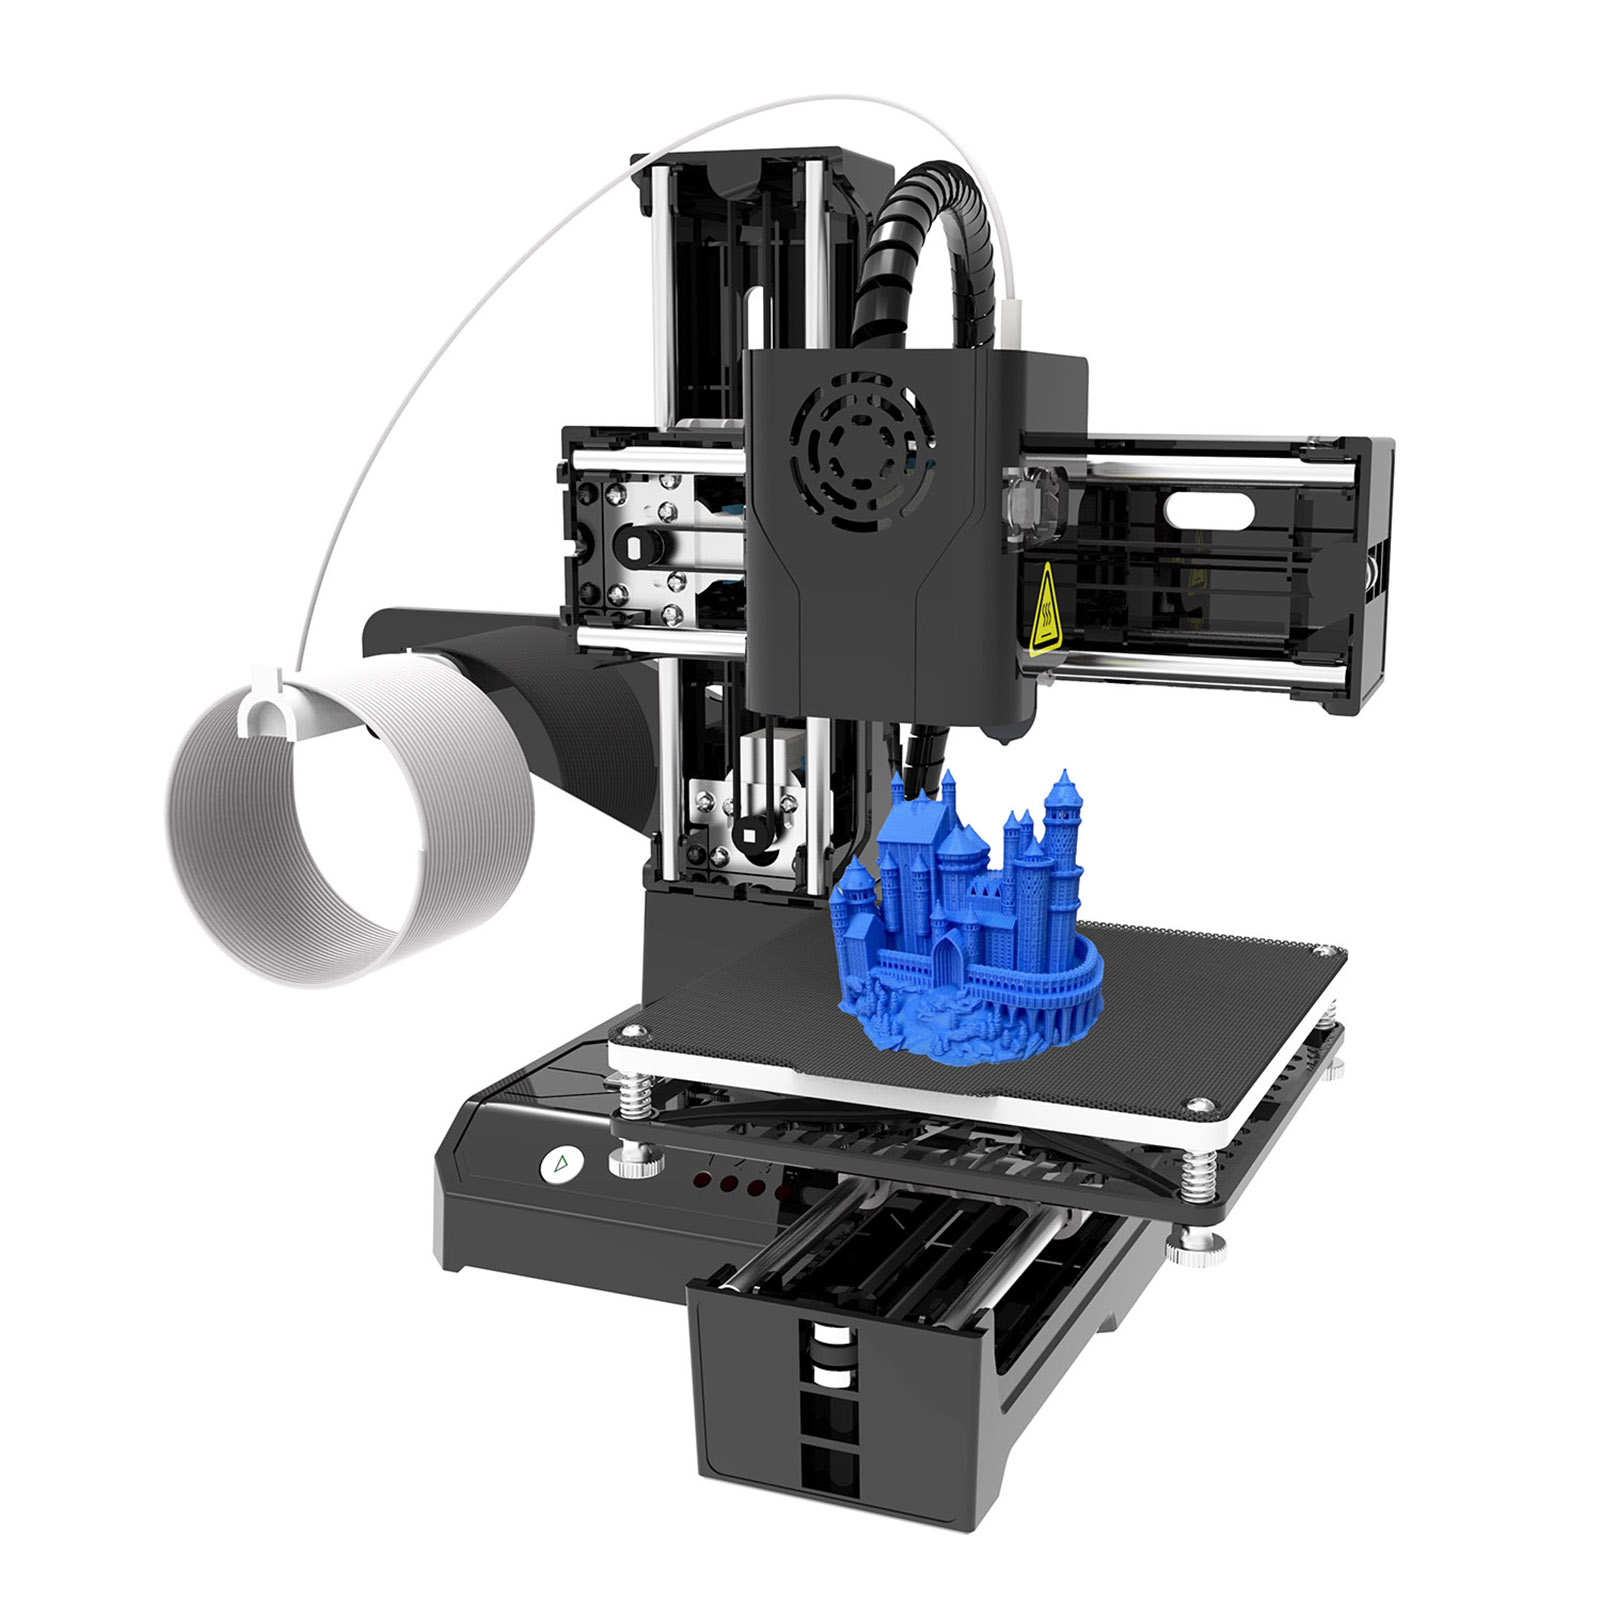 This comprehensive guide explores the world of 3D printers for kid缩略图